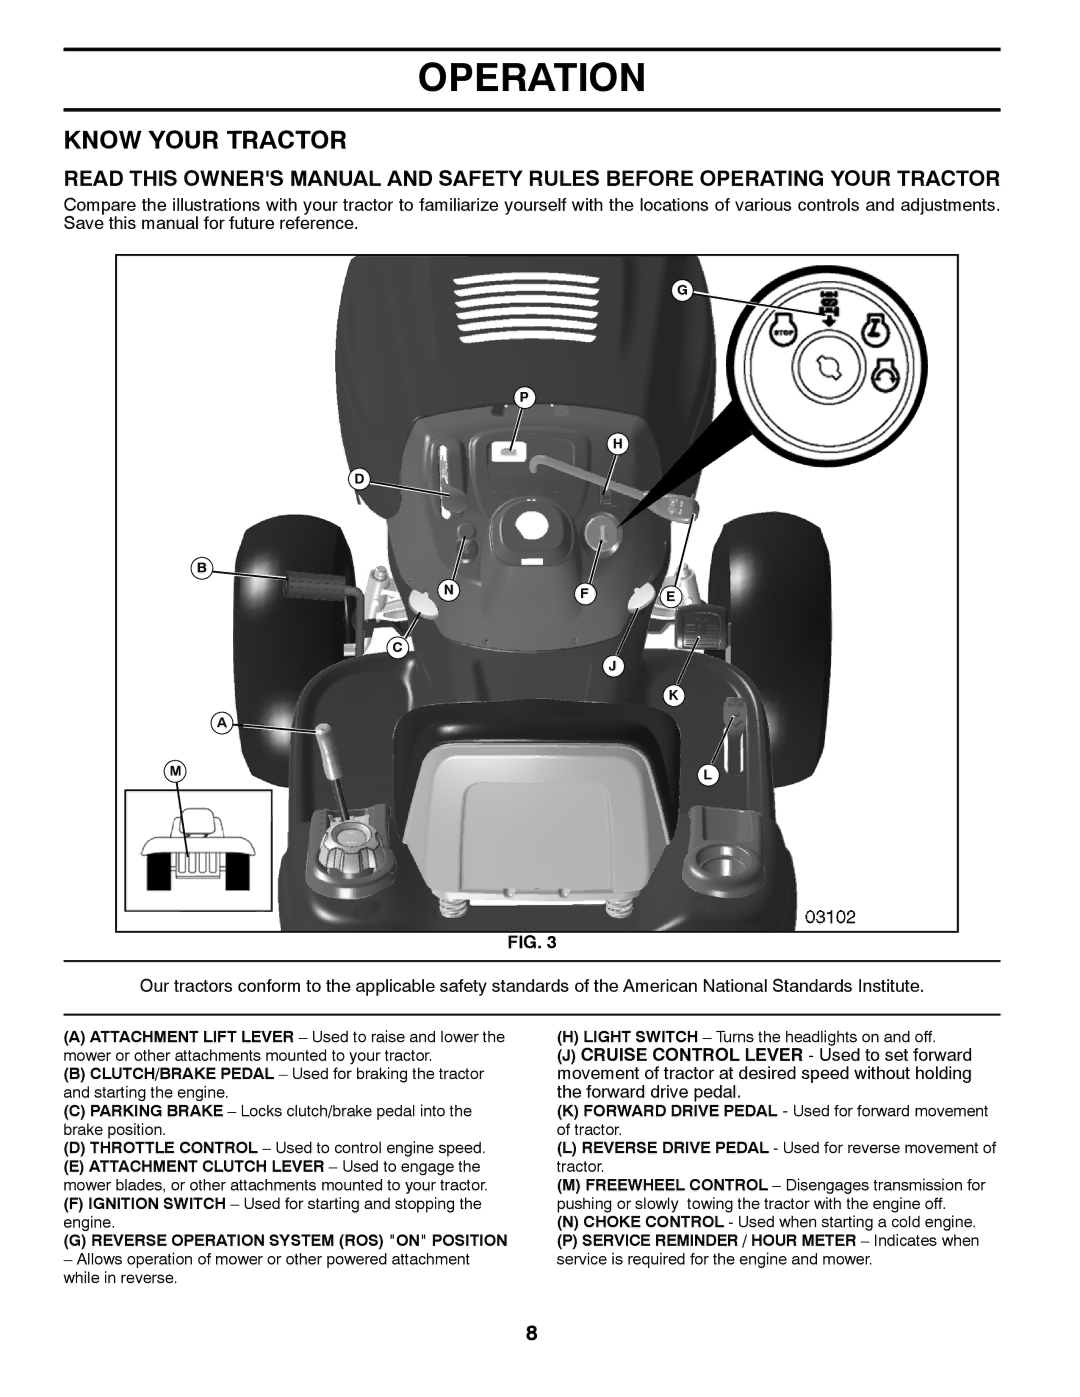 Poulan 411259 manual Know Your Tractor, Ignition Switch Used for starting and stopping the engine 